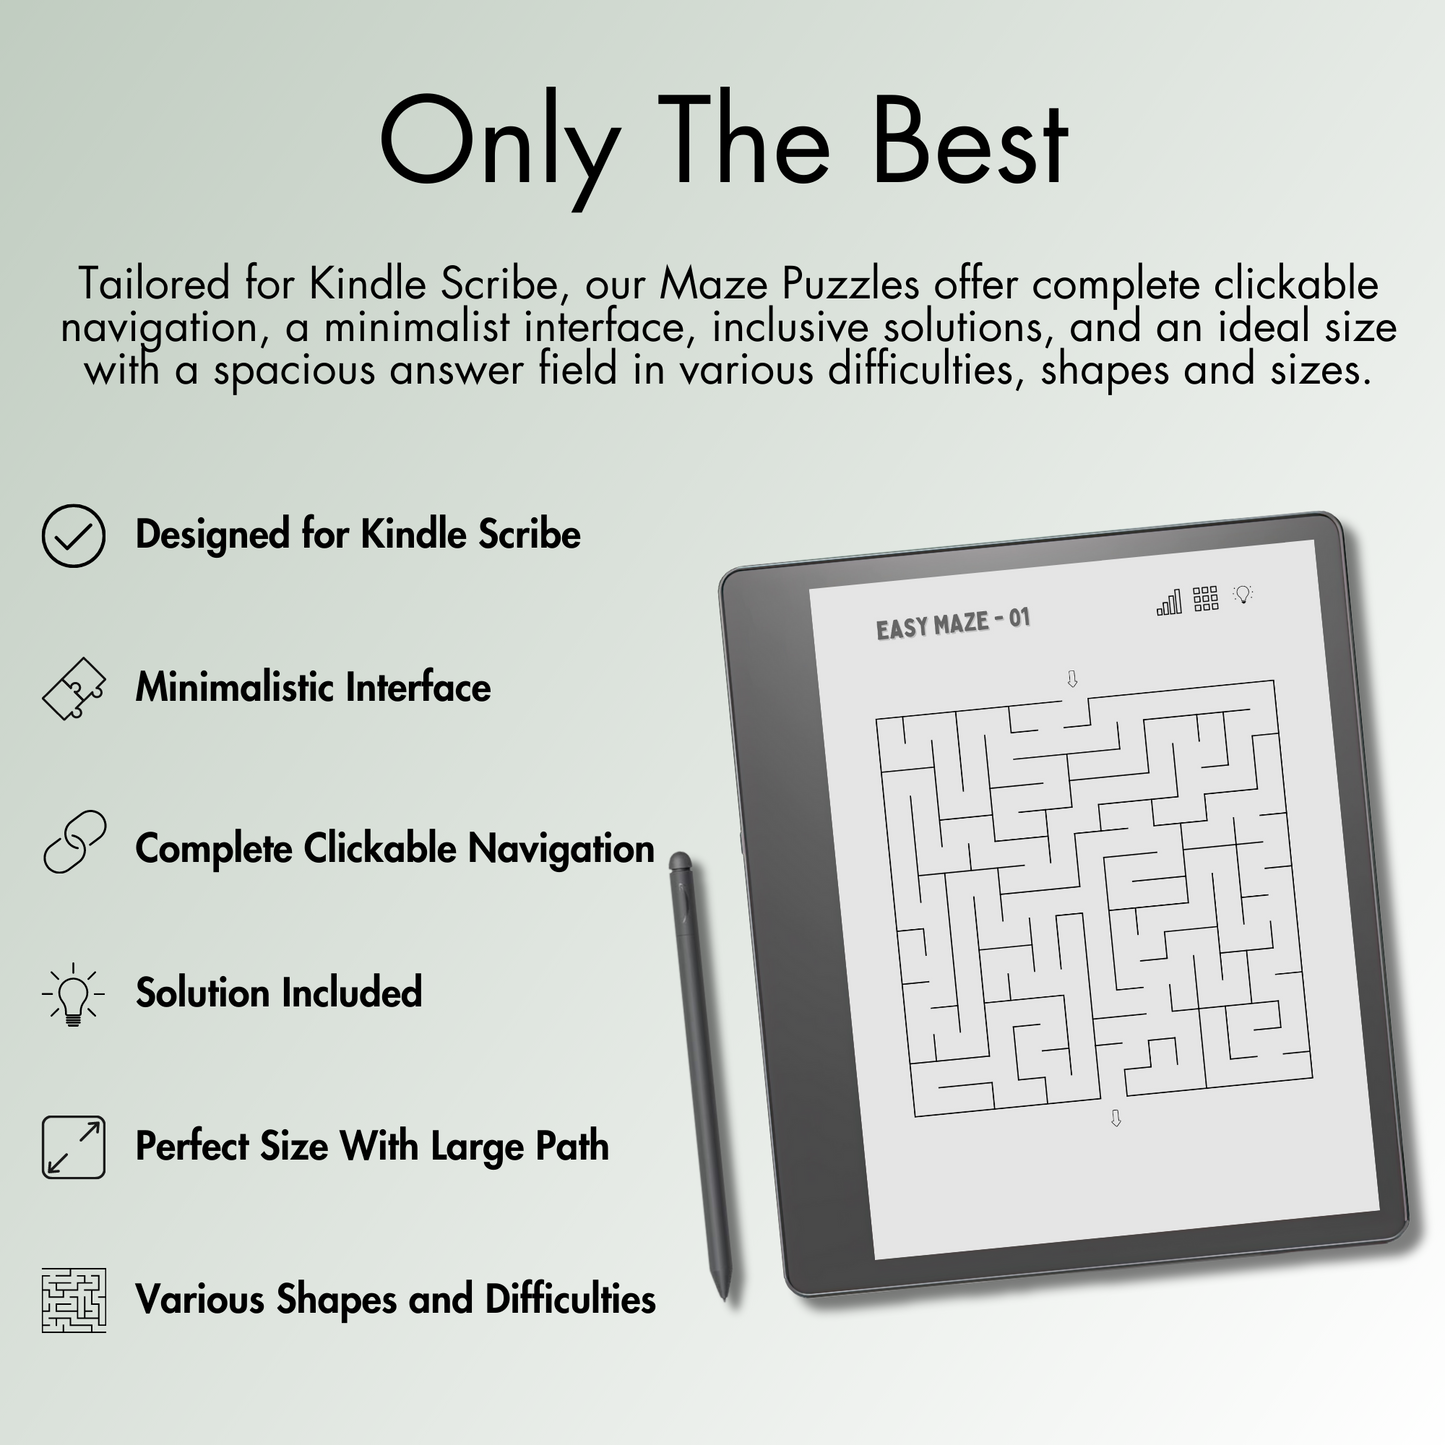 Our Maze Puzzles offer complete clickable navigation, a minimalist interface, inclusive solutions, and an ideal size with a spacious answer field for Kindle Scribe E-Ink screen.